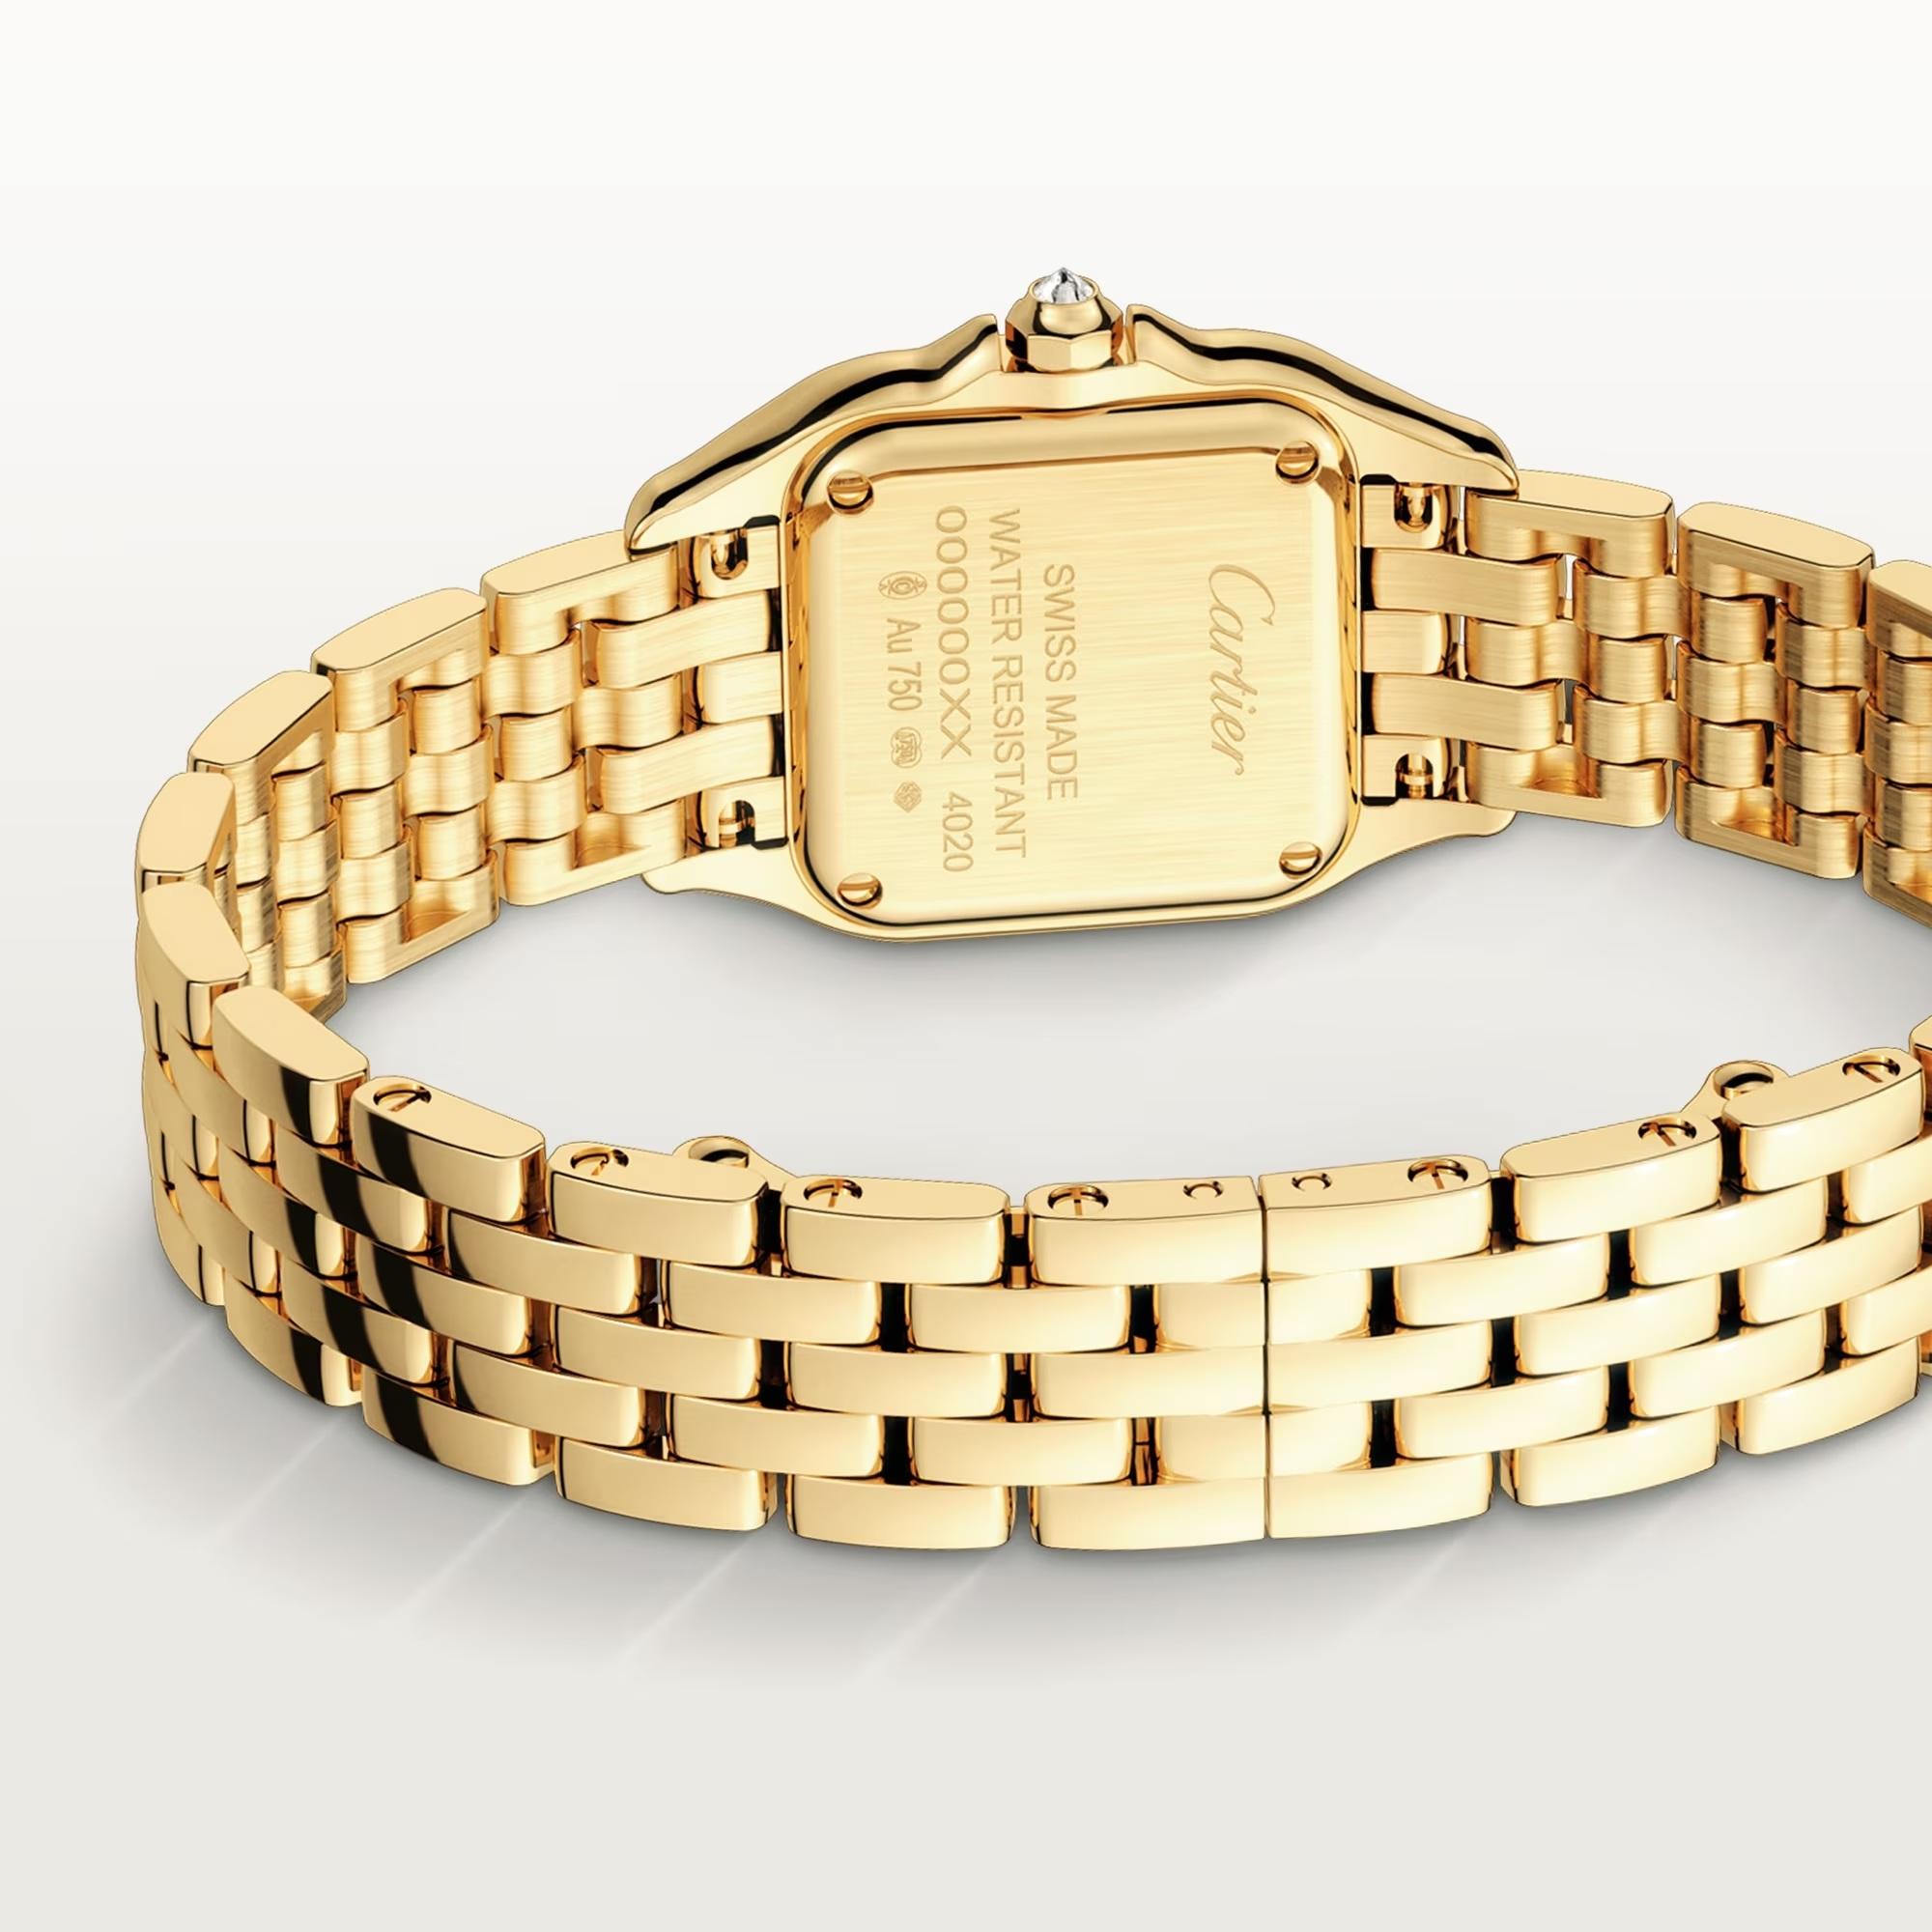 Panthere de Cartier Watch in Yellow Gold with Diamonds, small model 4